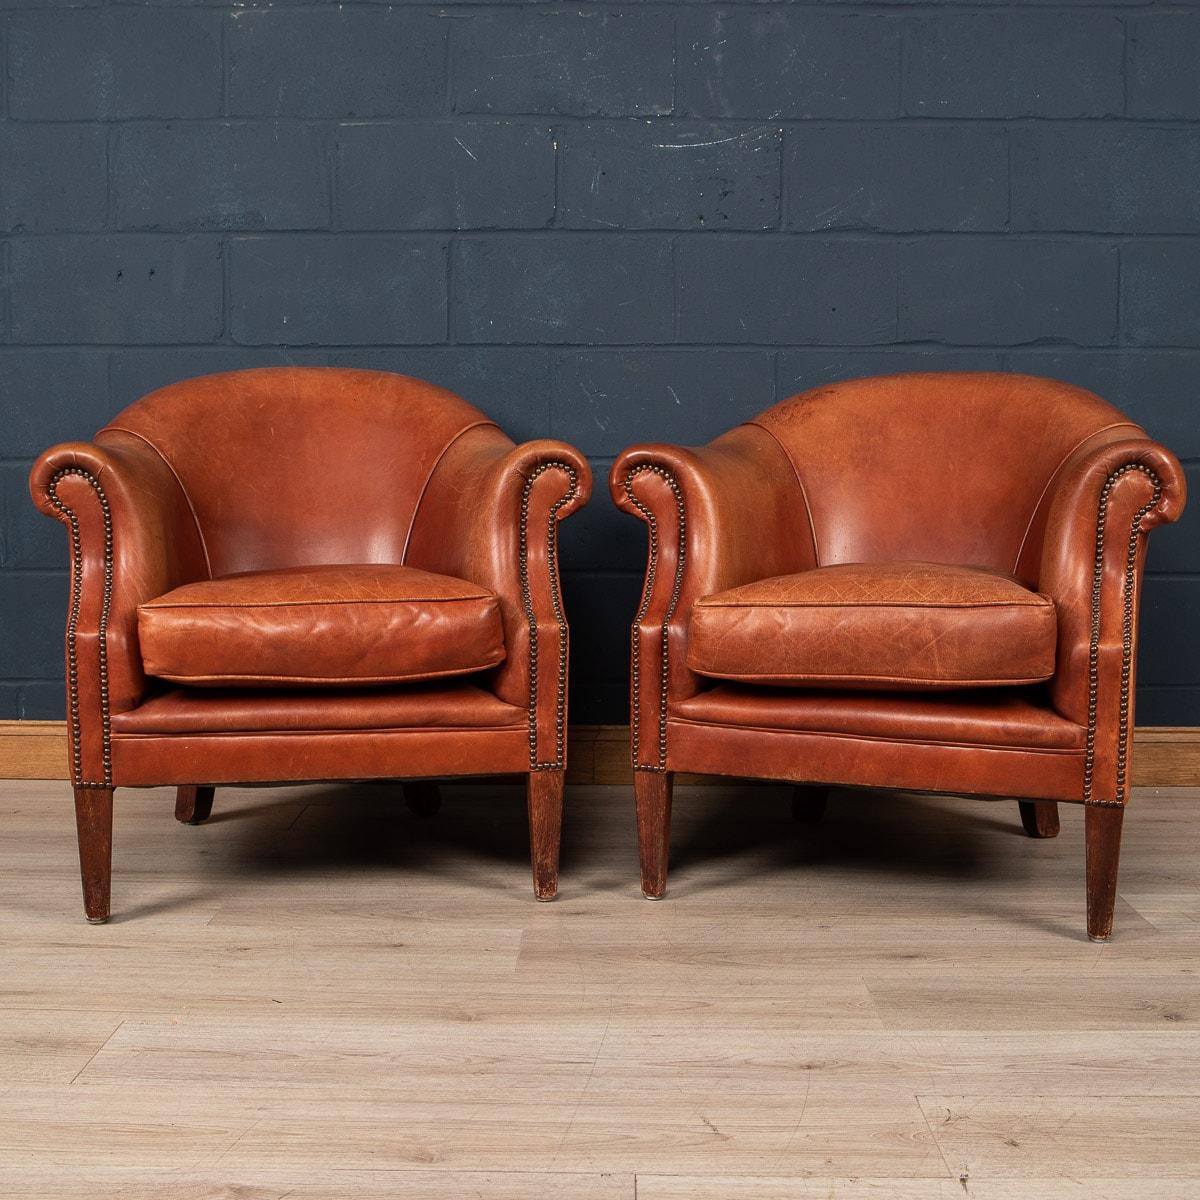 A wonderful pair of leather wing back armchairs. Dating to the latter part of the 20th century these chairs have been realised by the finest Dutch craftsmen, the solid wood frame upholstered in superb quality honey coloured sheepskin leather which